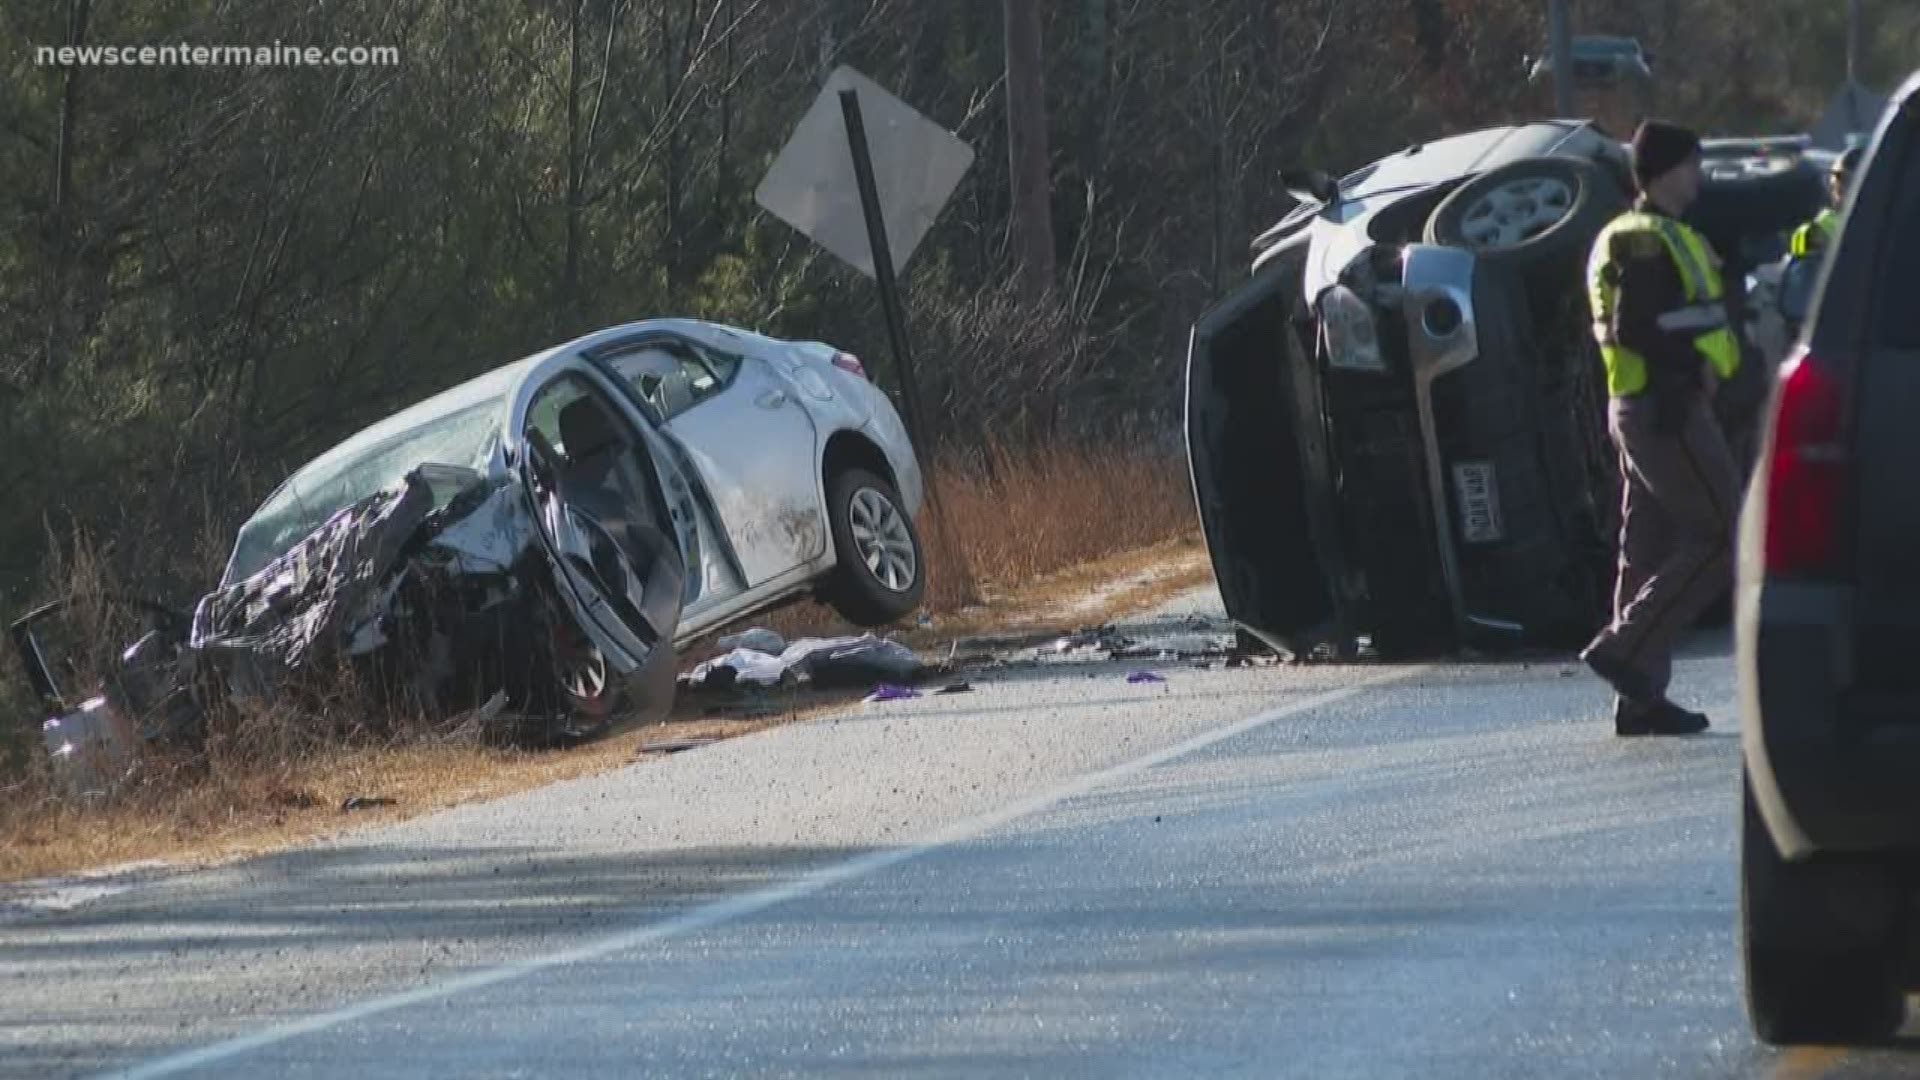 Eight year old dead and three others injured in three vehicle crash near the Standish, Windham line.